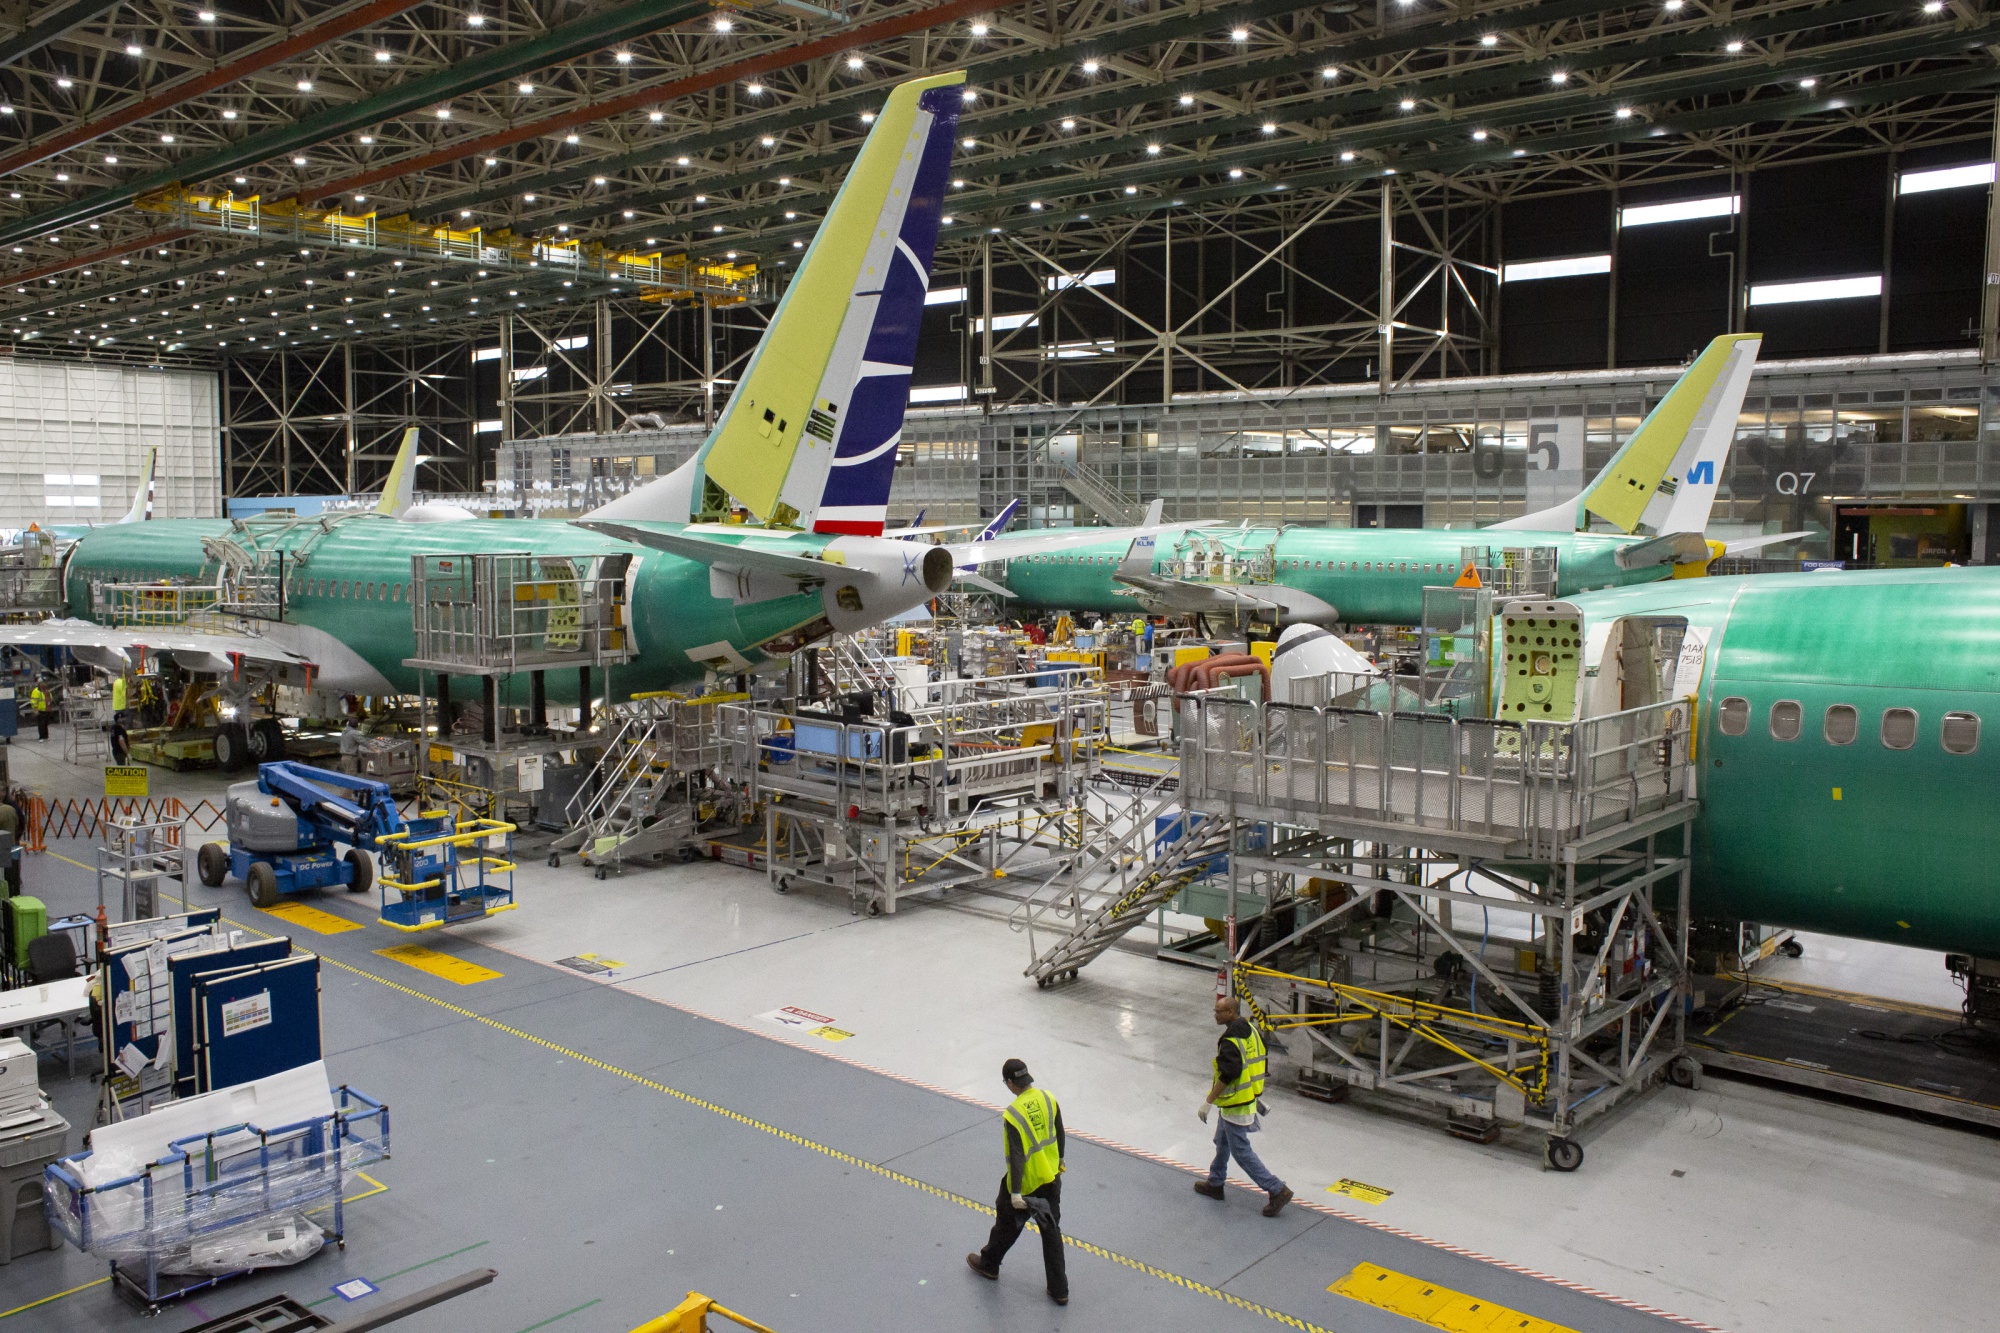 737 Max airplanes at the Boeing Co. manufacturing facility in Renton, Washington, on March 27, 2019.